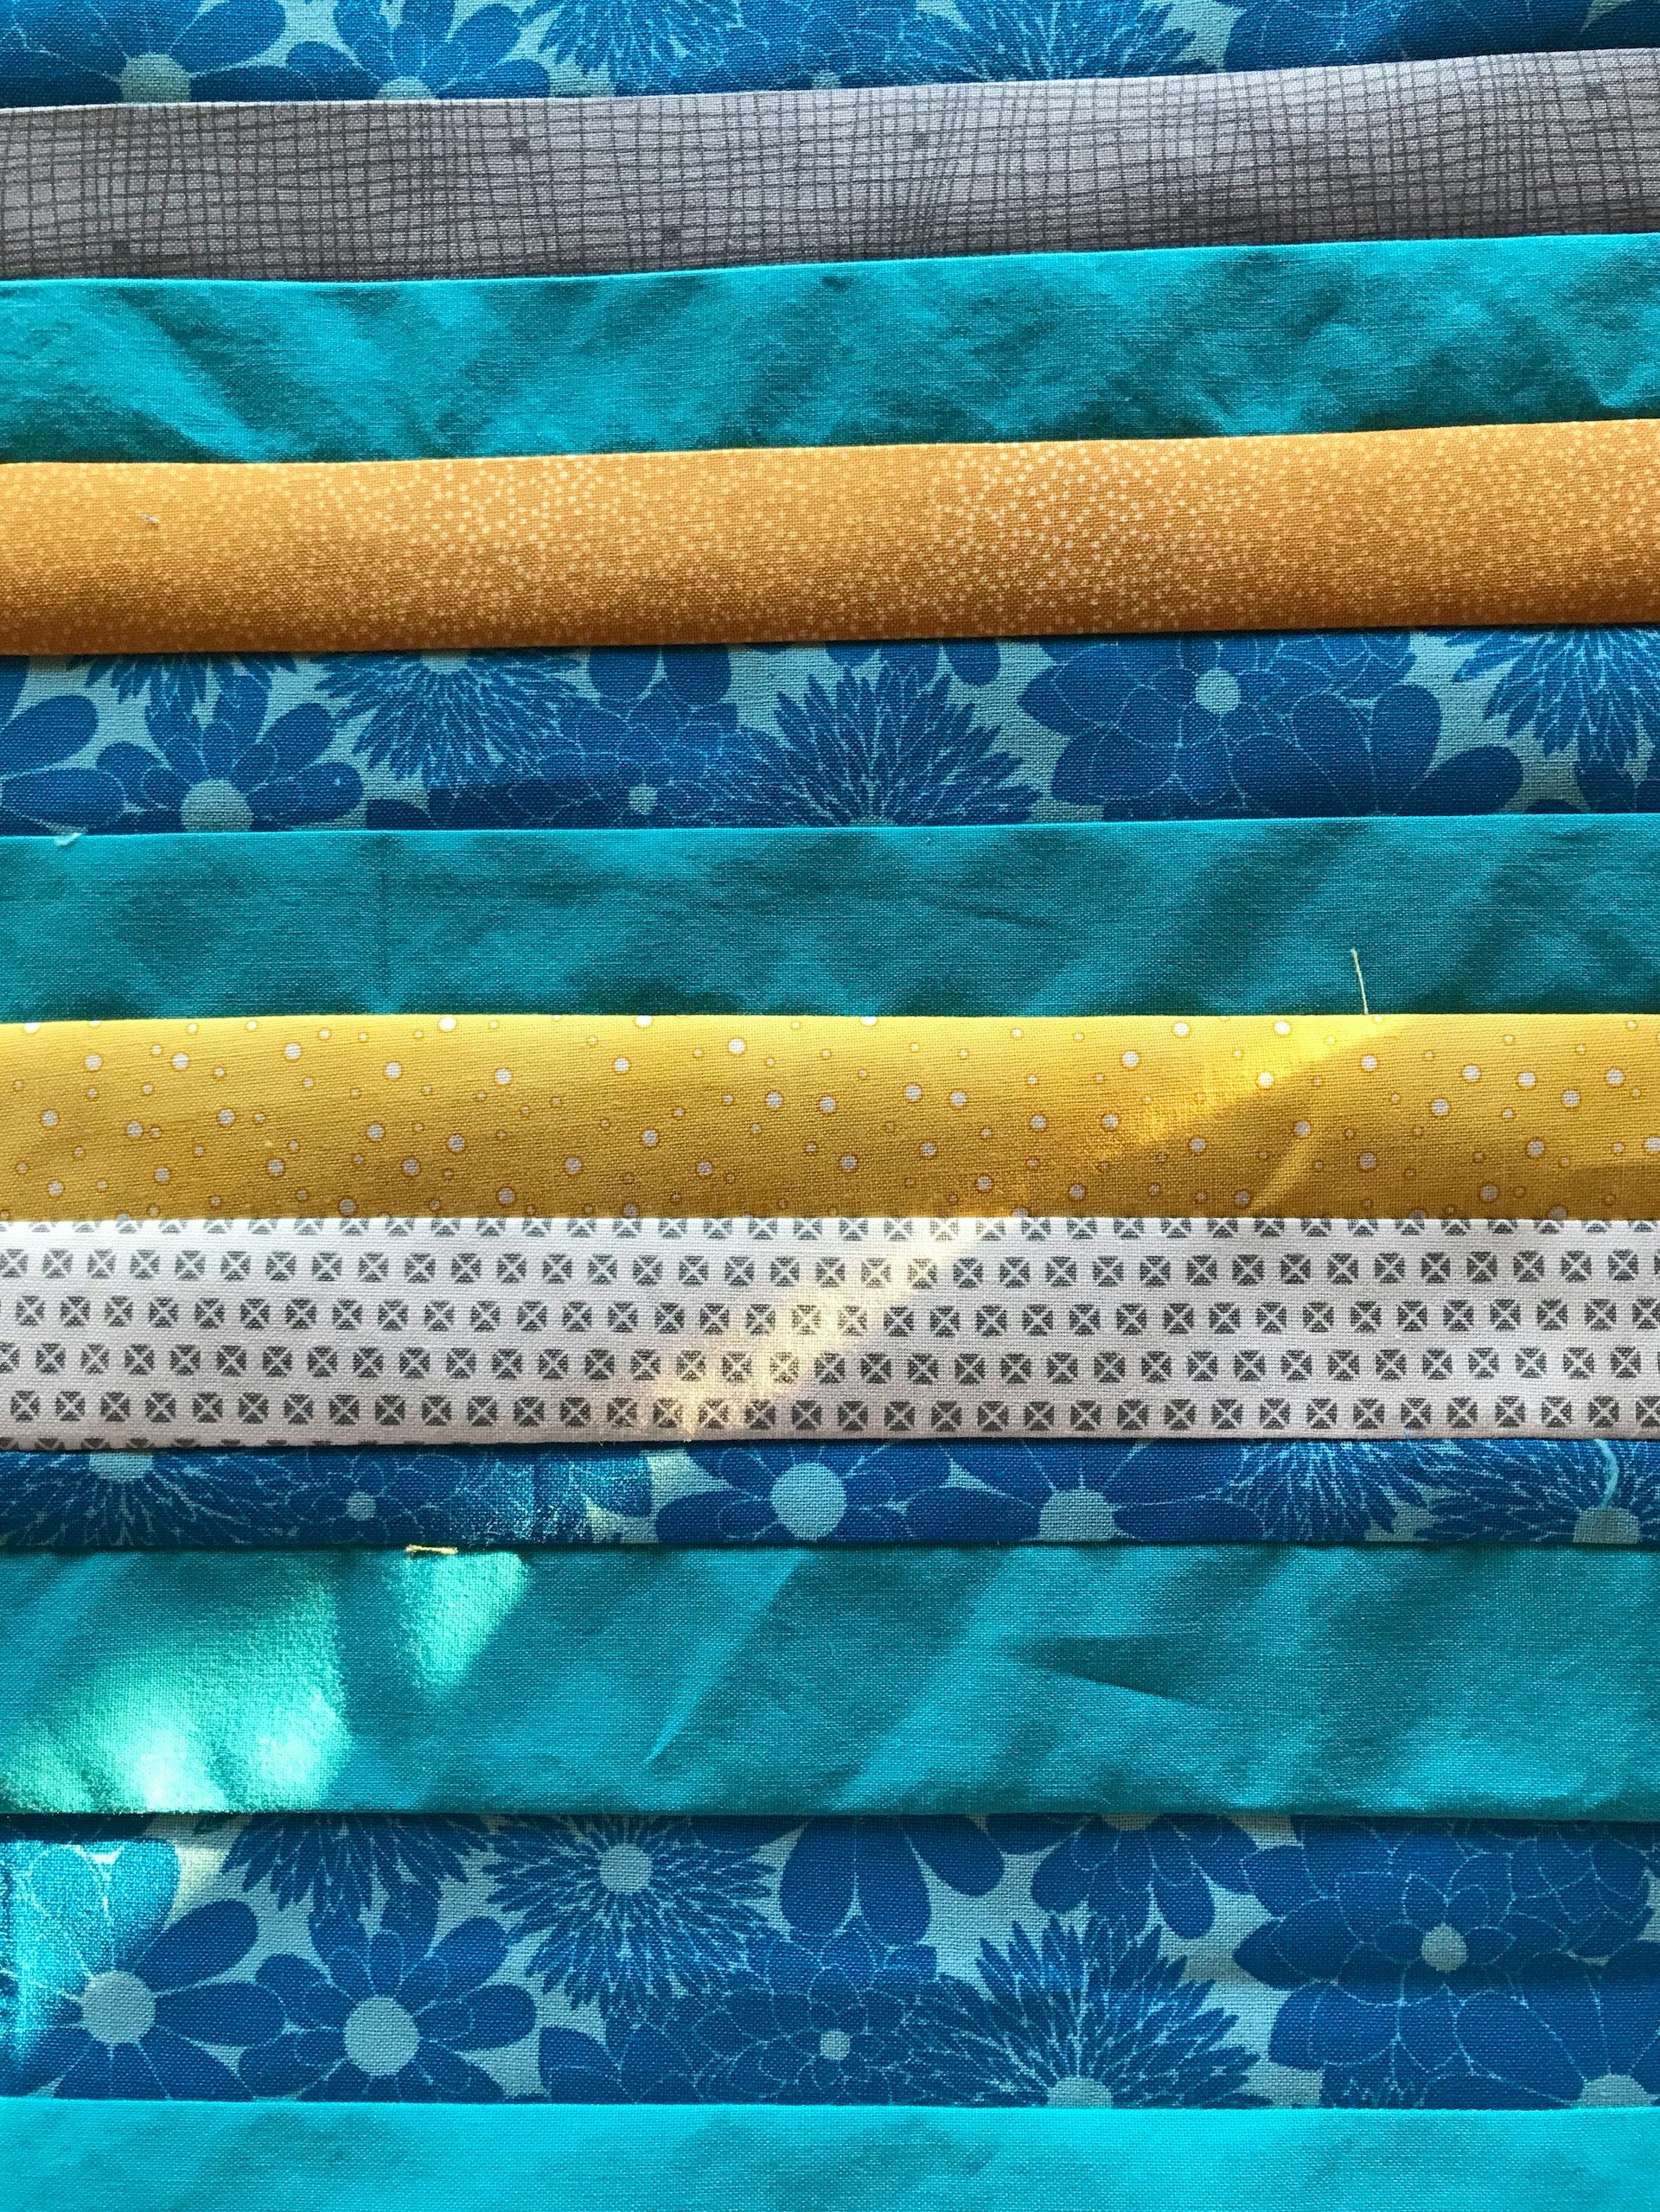 A close up of blue, yellow and white fabric.